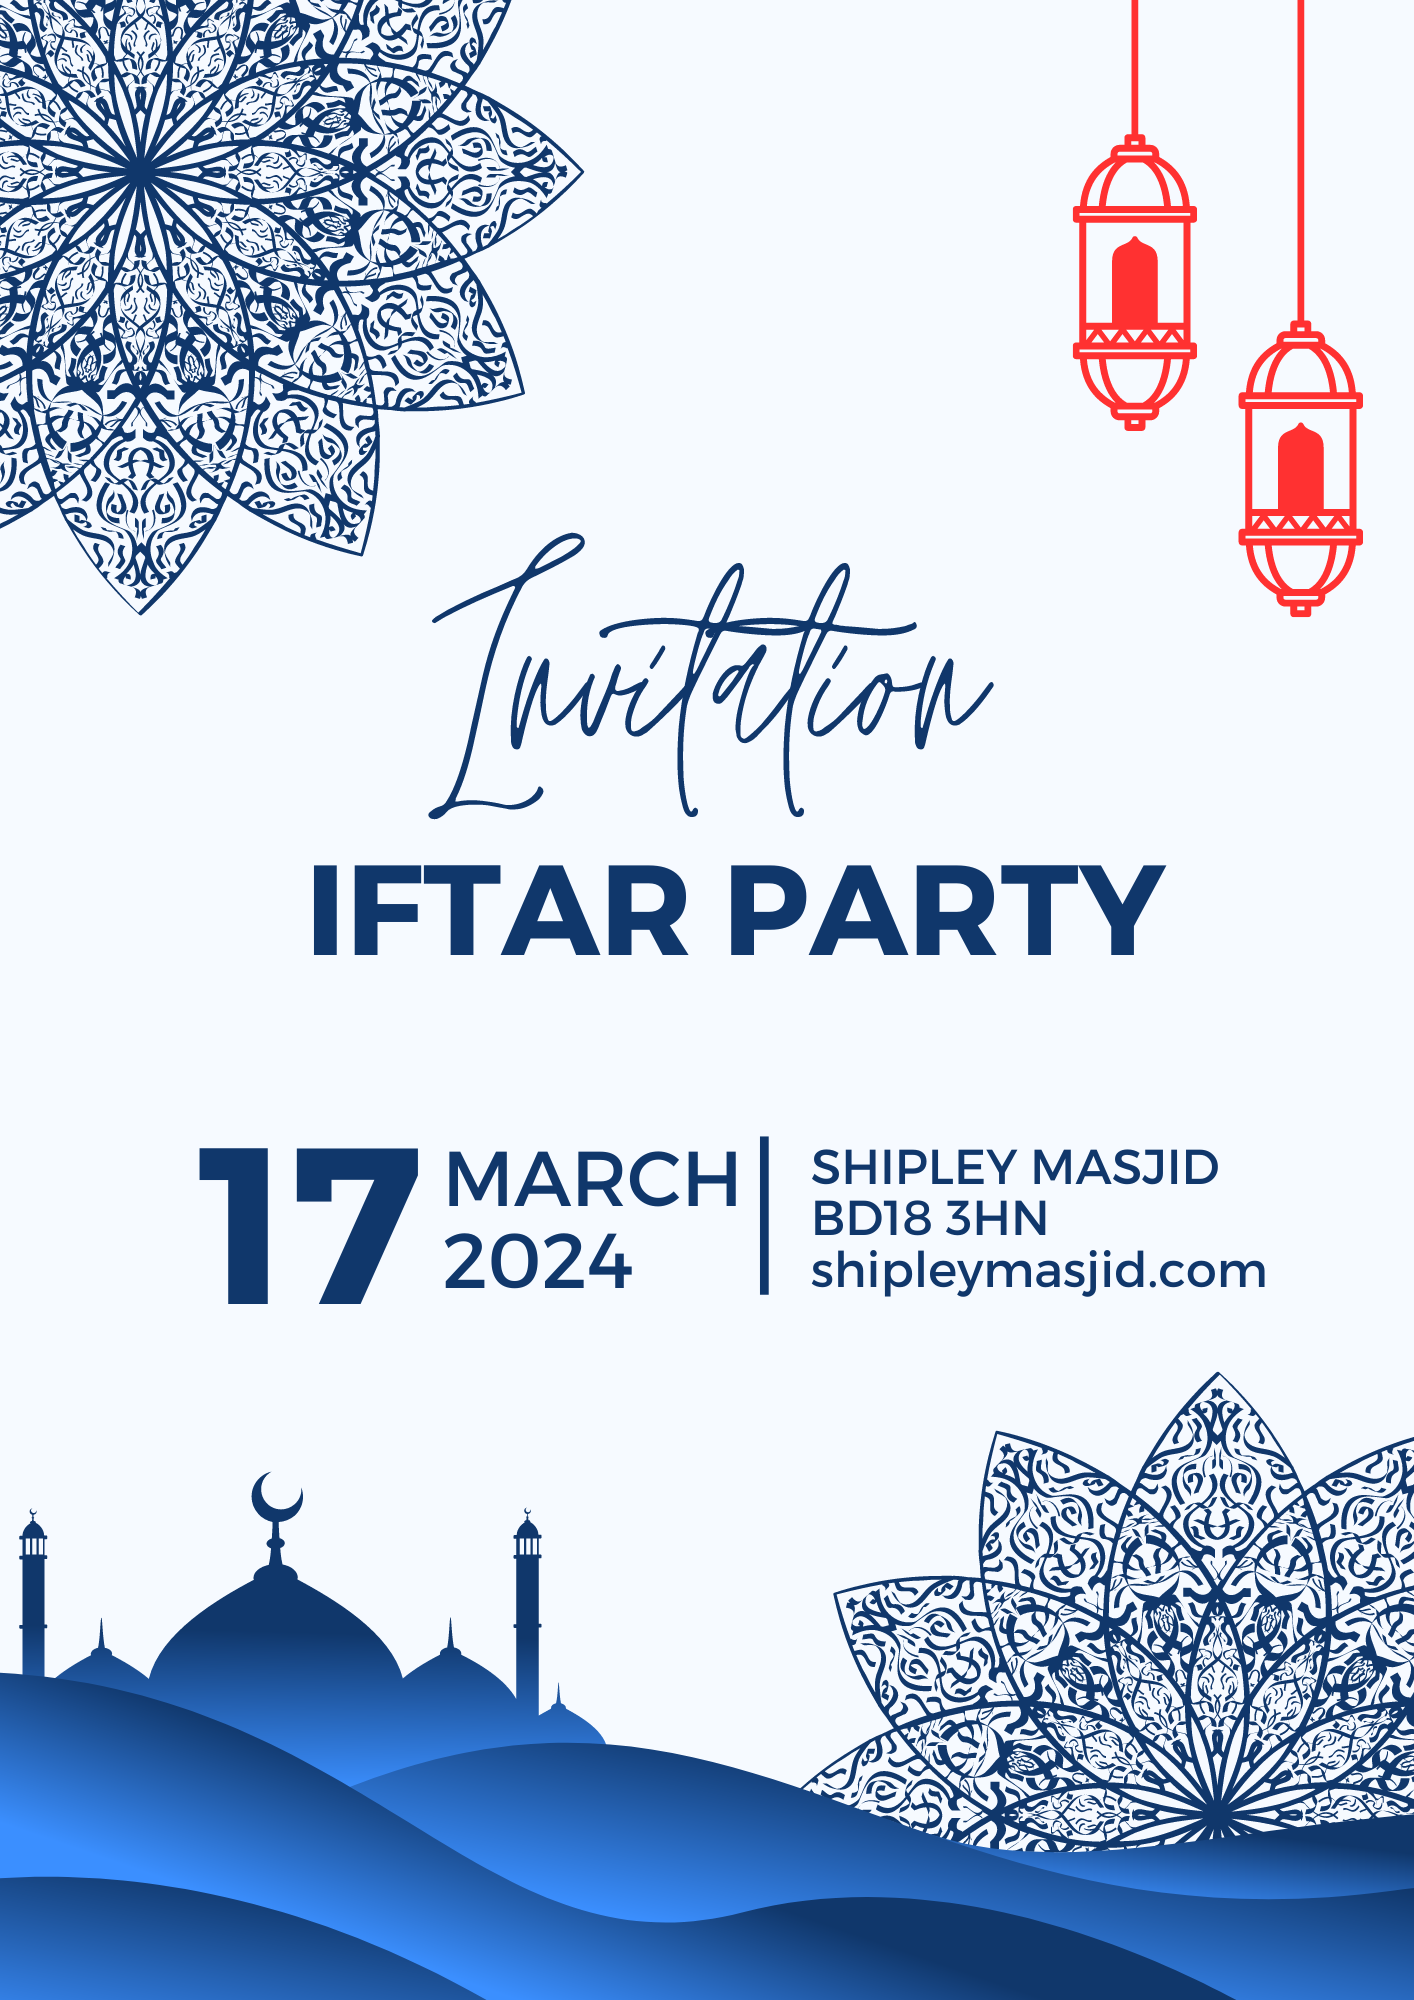 Blue_Aesthetic_Simple_Iftar_Party_Invitation__A4_Document.png